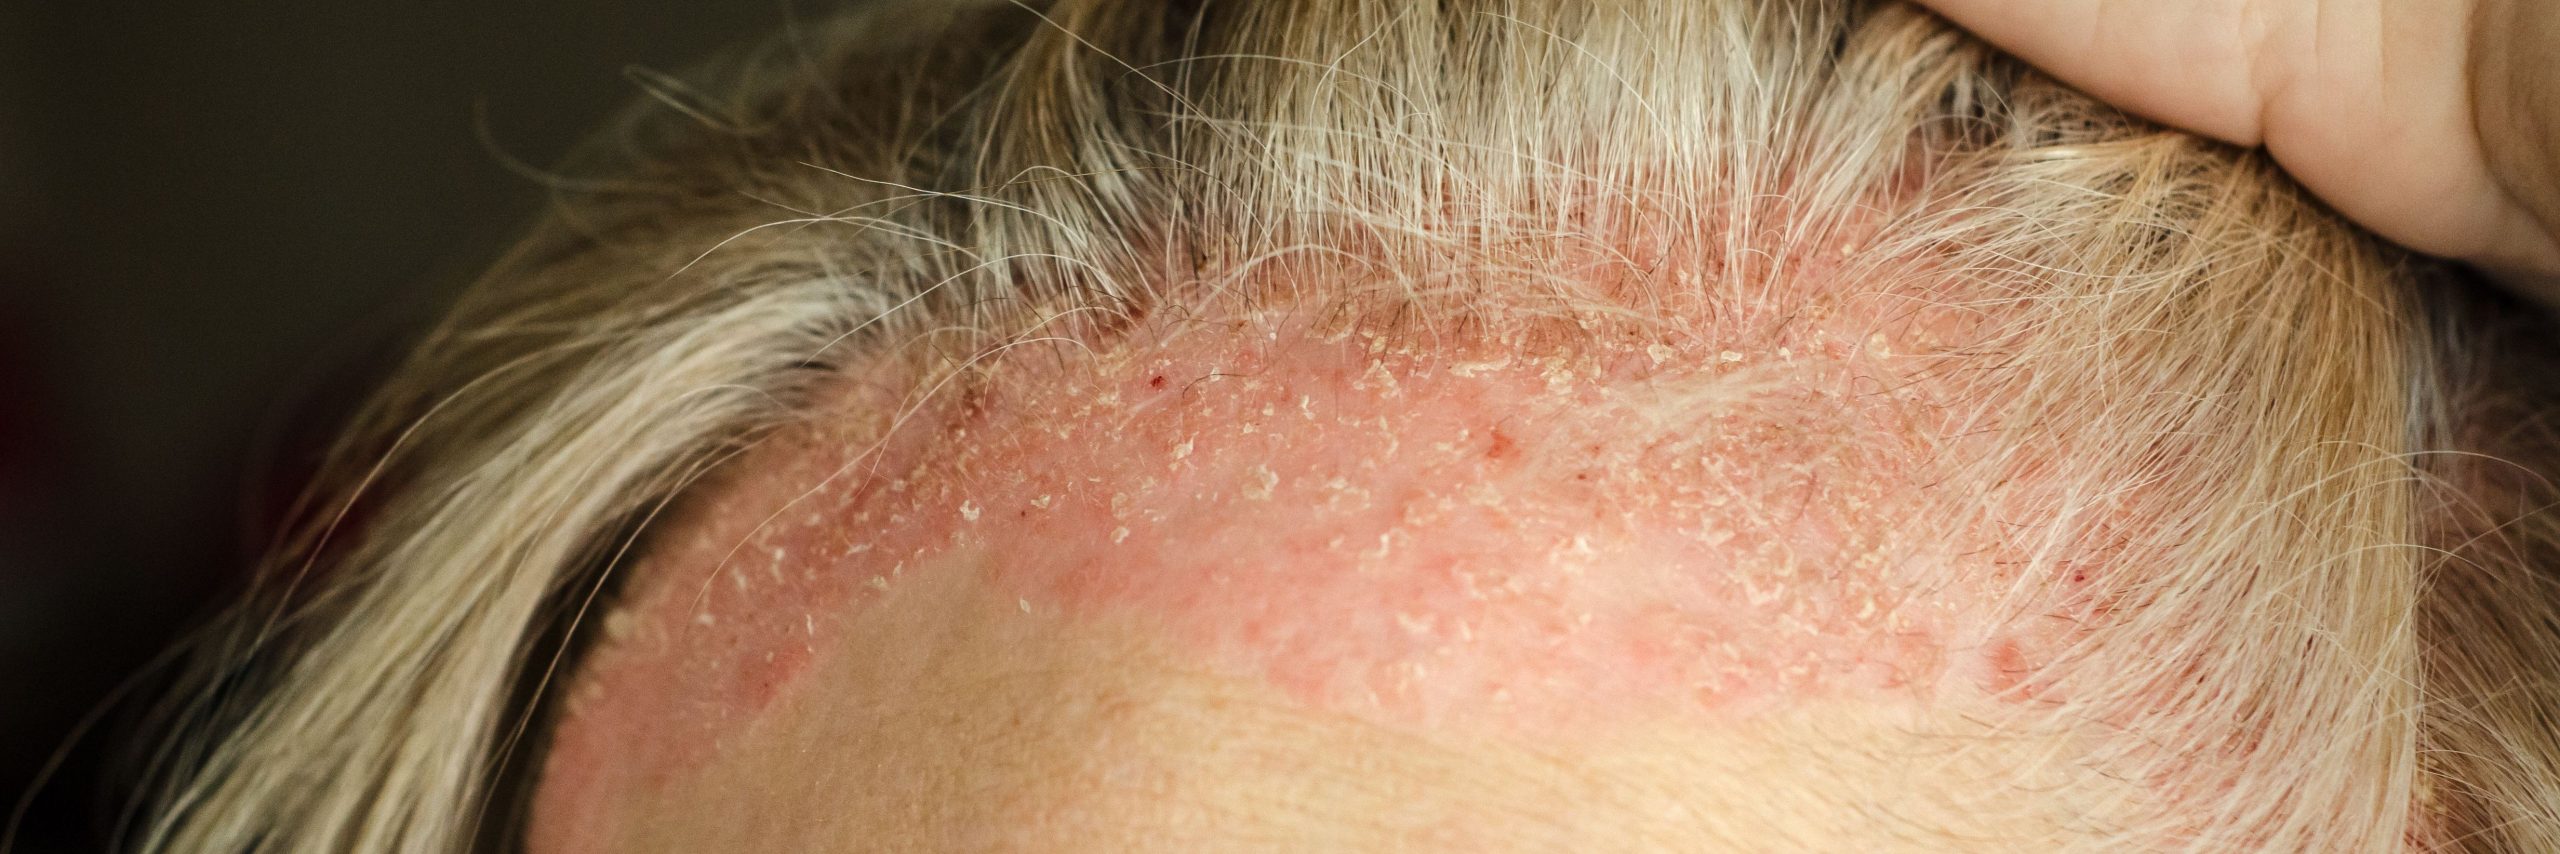 Real-World Impacts of ‘Special Area Involvement’ in Patients With Psoriasis